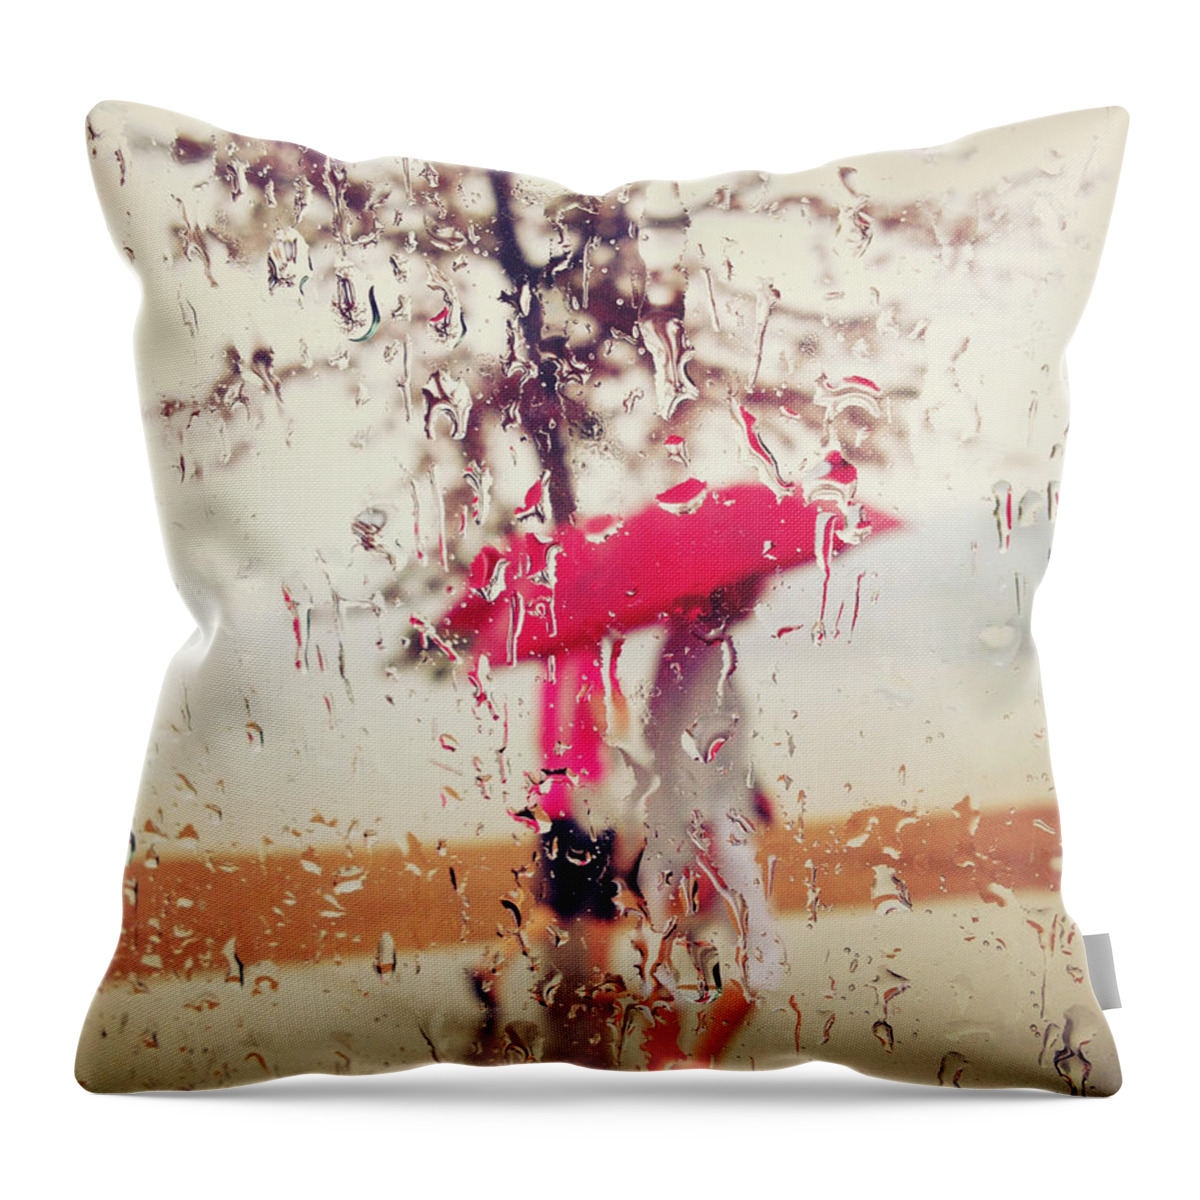 Rain Throw Pillow featuring the photograph Push The Worry by J C